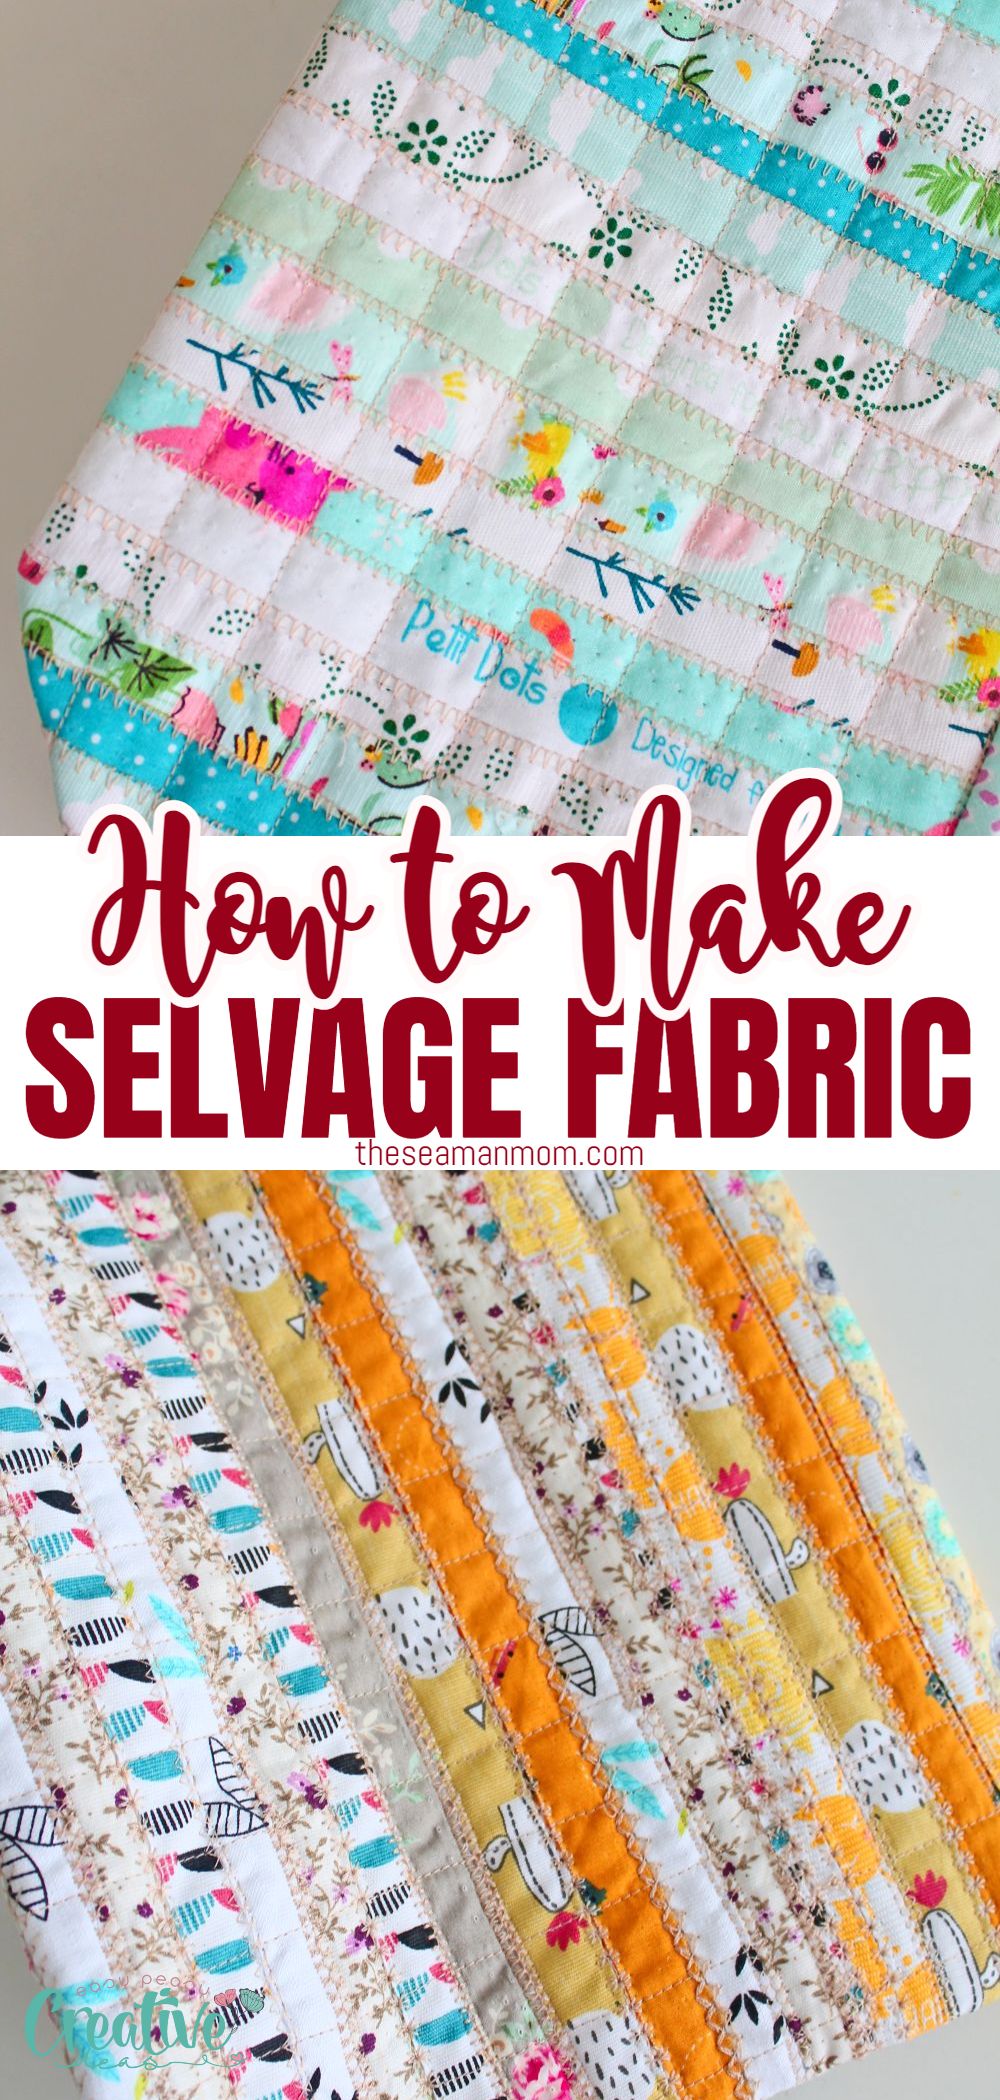 Are you looking for a creative way to make use of your selvage fabric scraps? With this tutorial, you can finally turn those leftover pieces into beautiful new fabric! By following the simple steps outlined below, you'll be able to create brand-new fabric from your existing selvage pieces. Whether you're making garments, accessories, or home décor items, you can use this tutorial to transform your selvage fabric into something new and unique. via @petroneagu